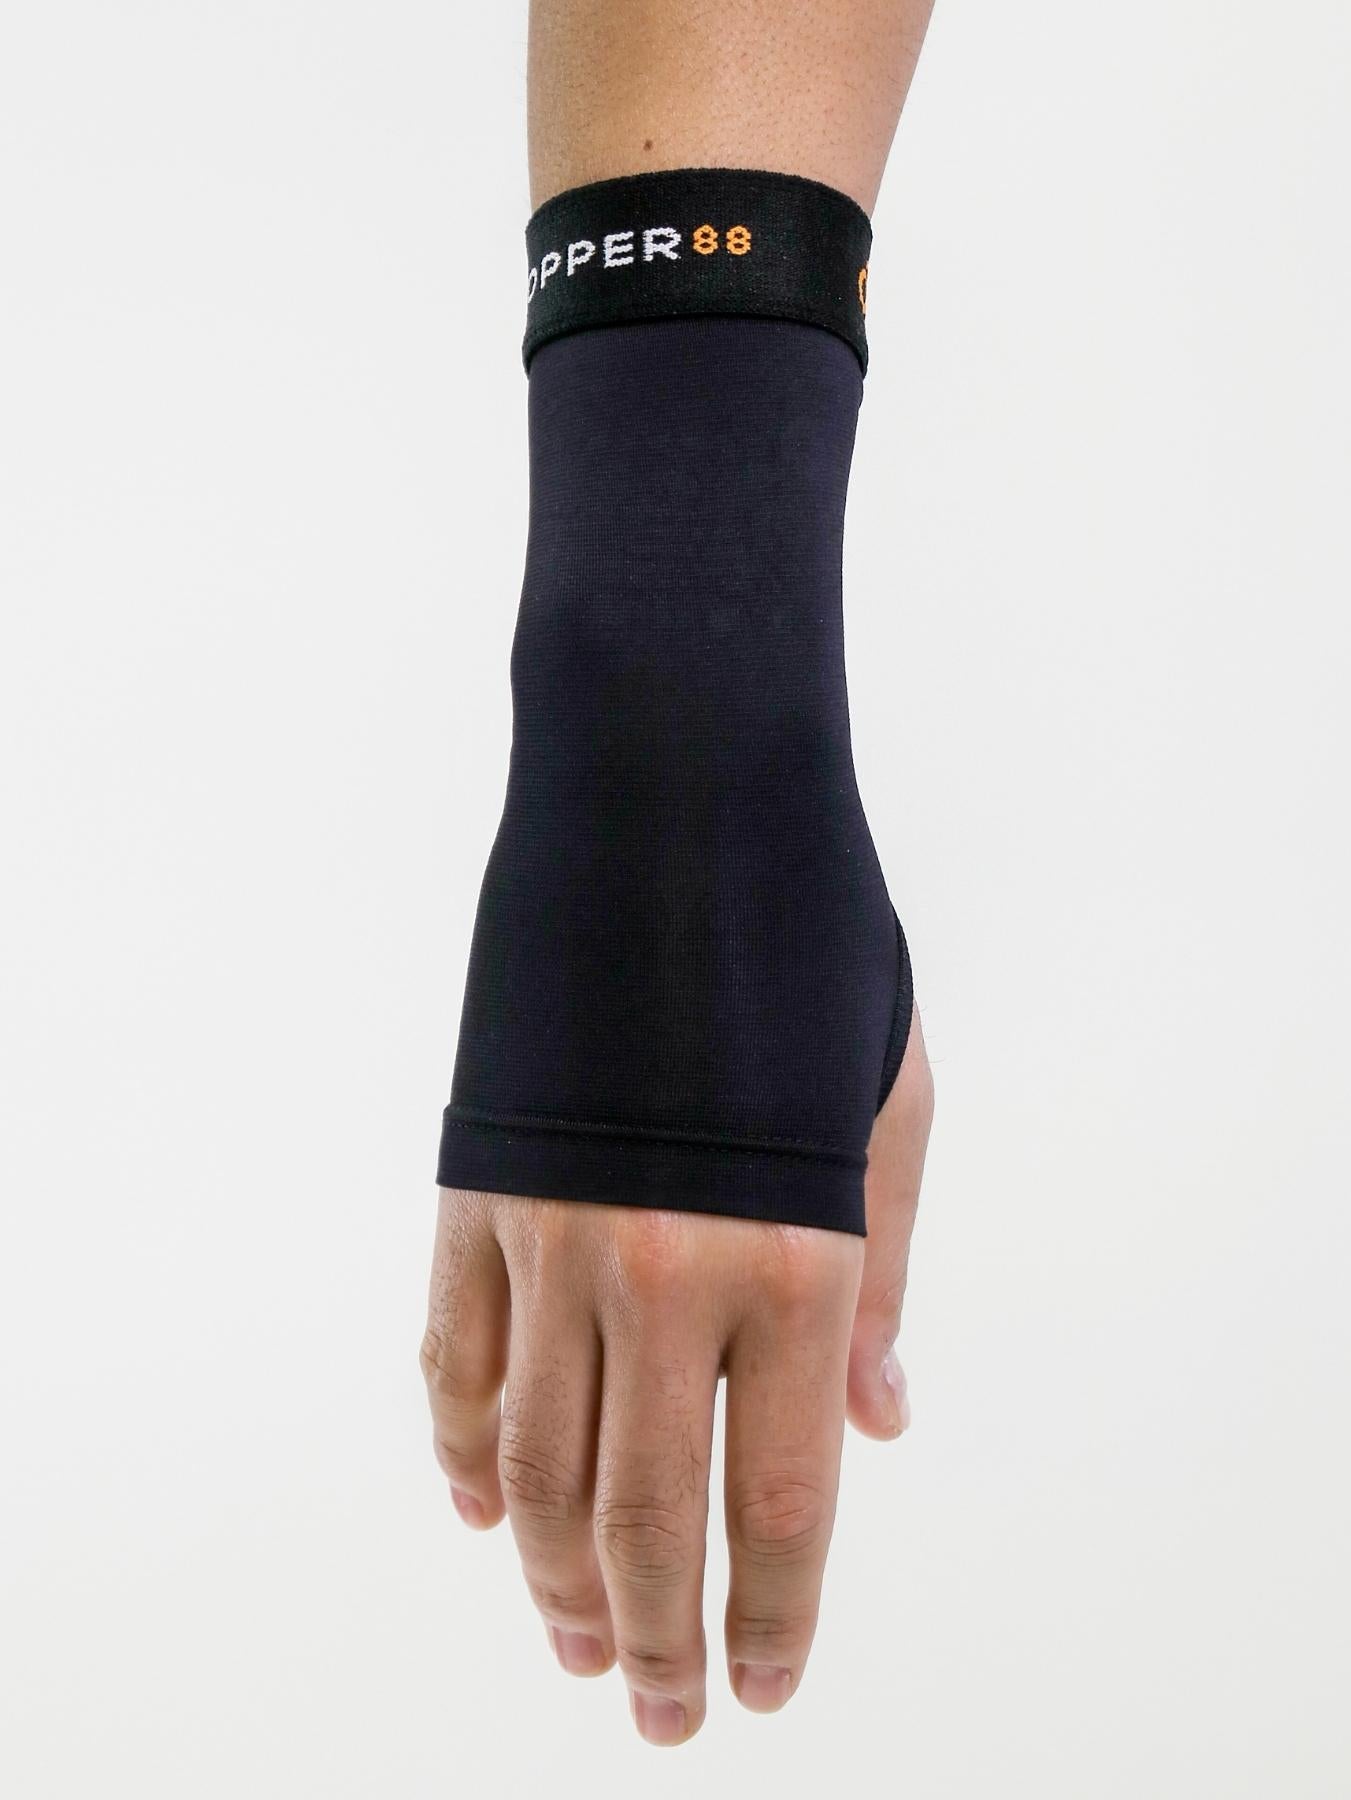 Compression Gloves, Elbow Sleeves & Braces - Copper Fit